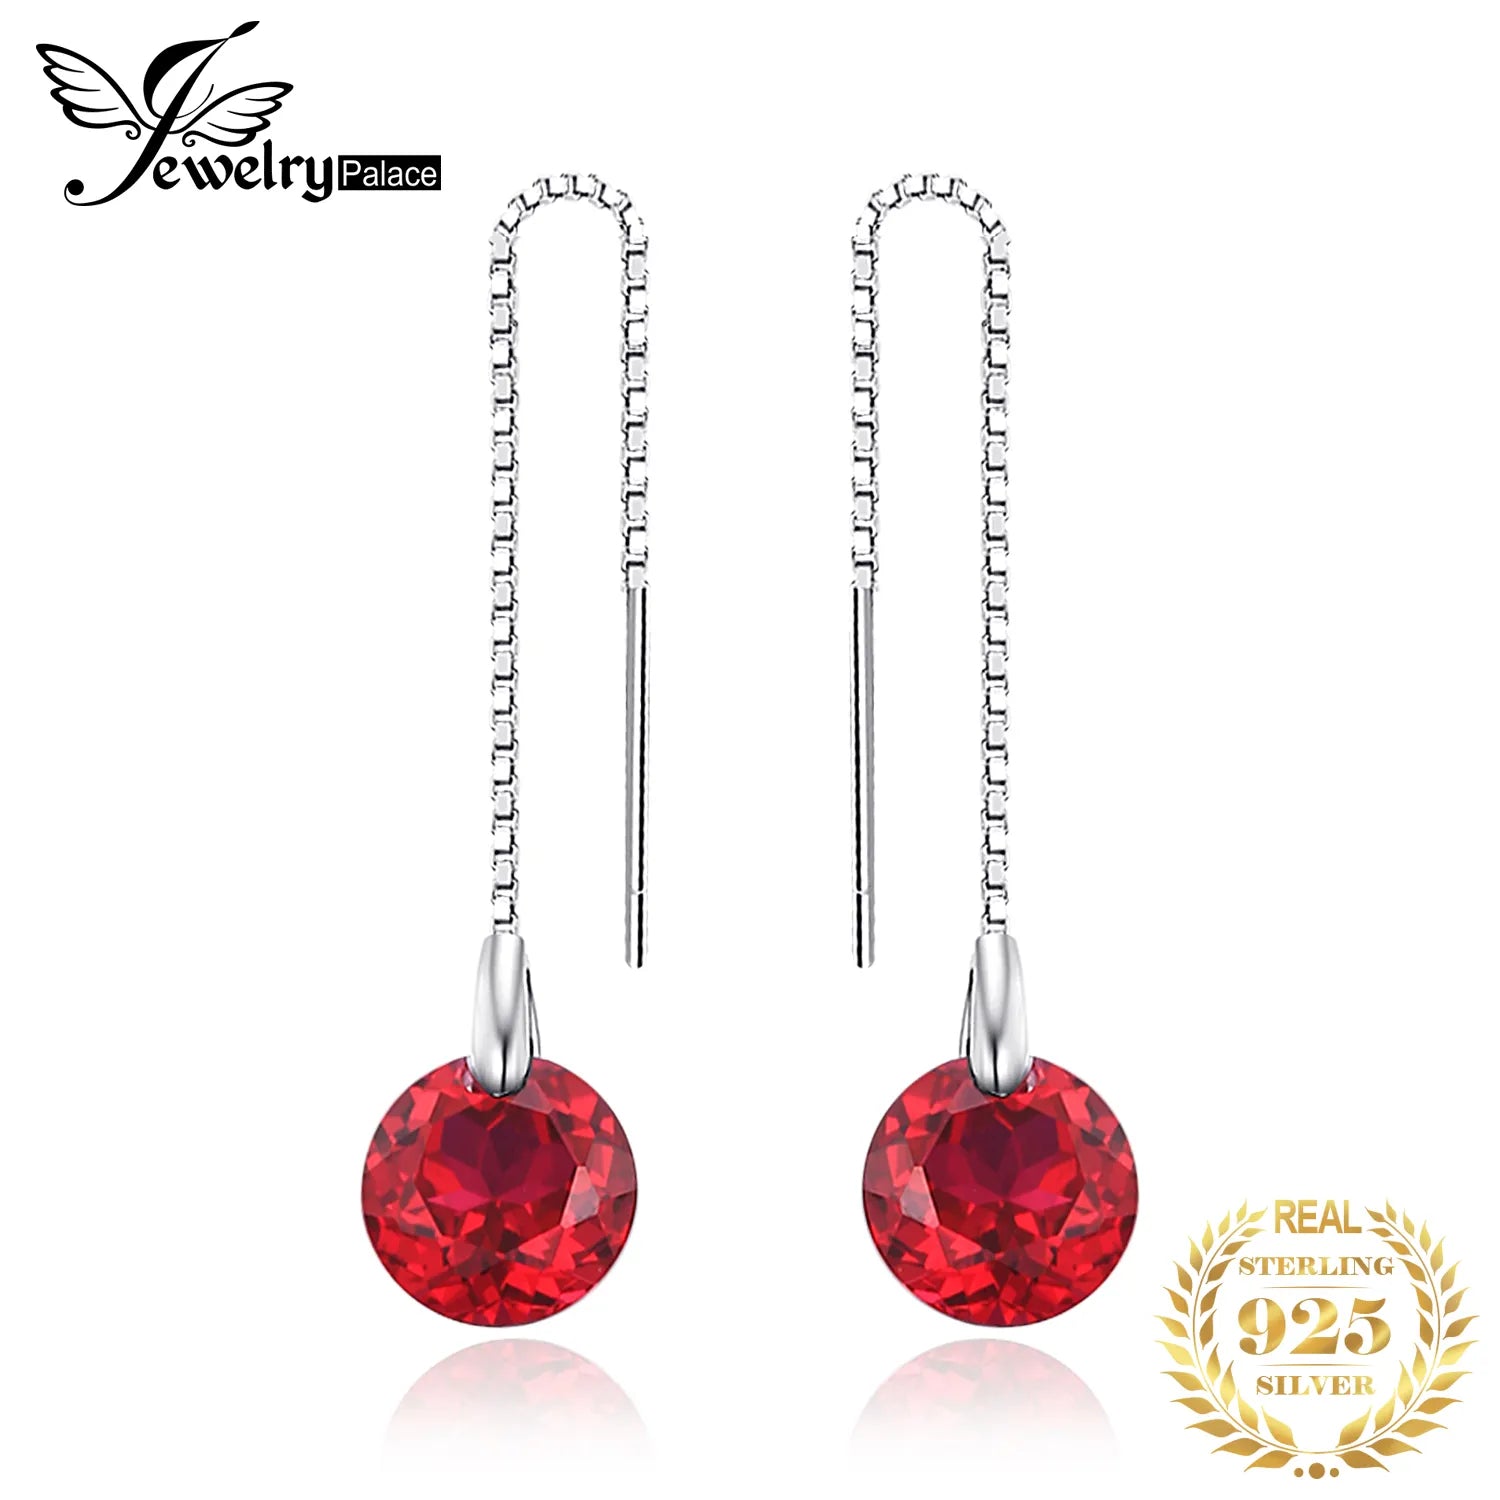 JewelryPalace 5.5ct Created Ruby 925 Sterling Silver Line Drop Earrings for Women Fashion Party Jewelry Trendy Gift New Arrival China